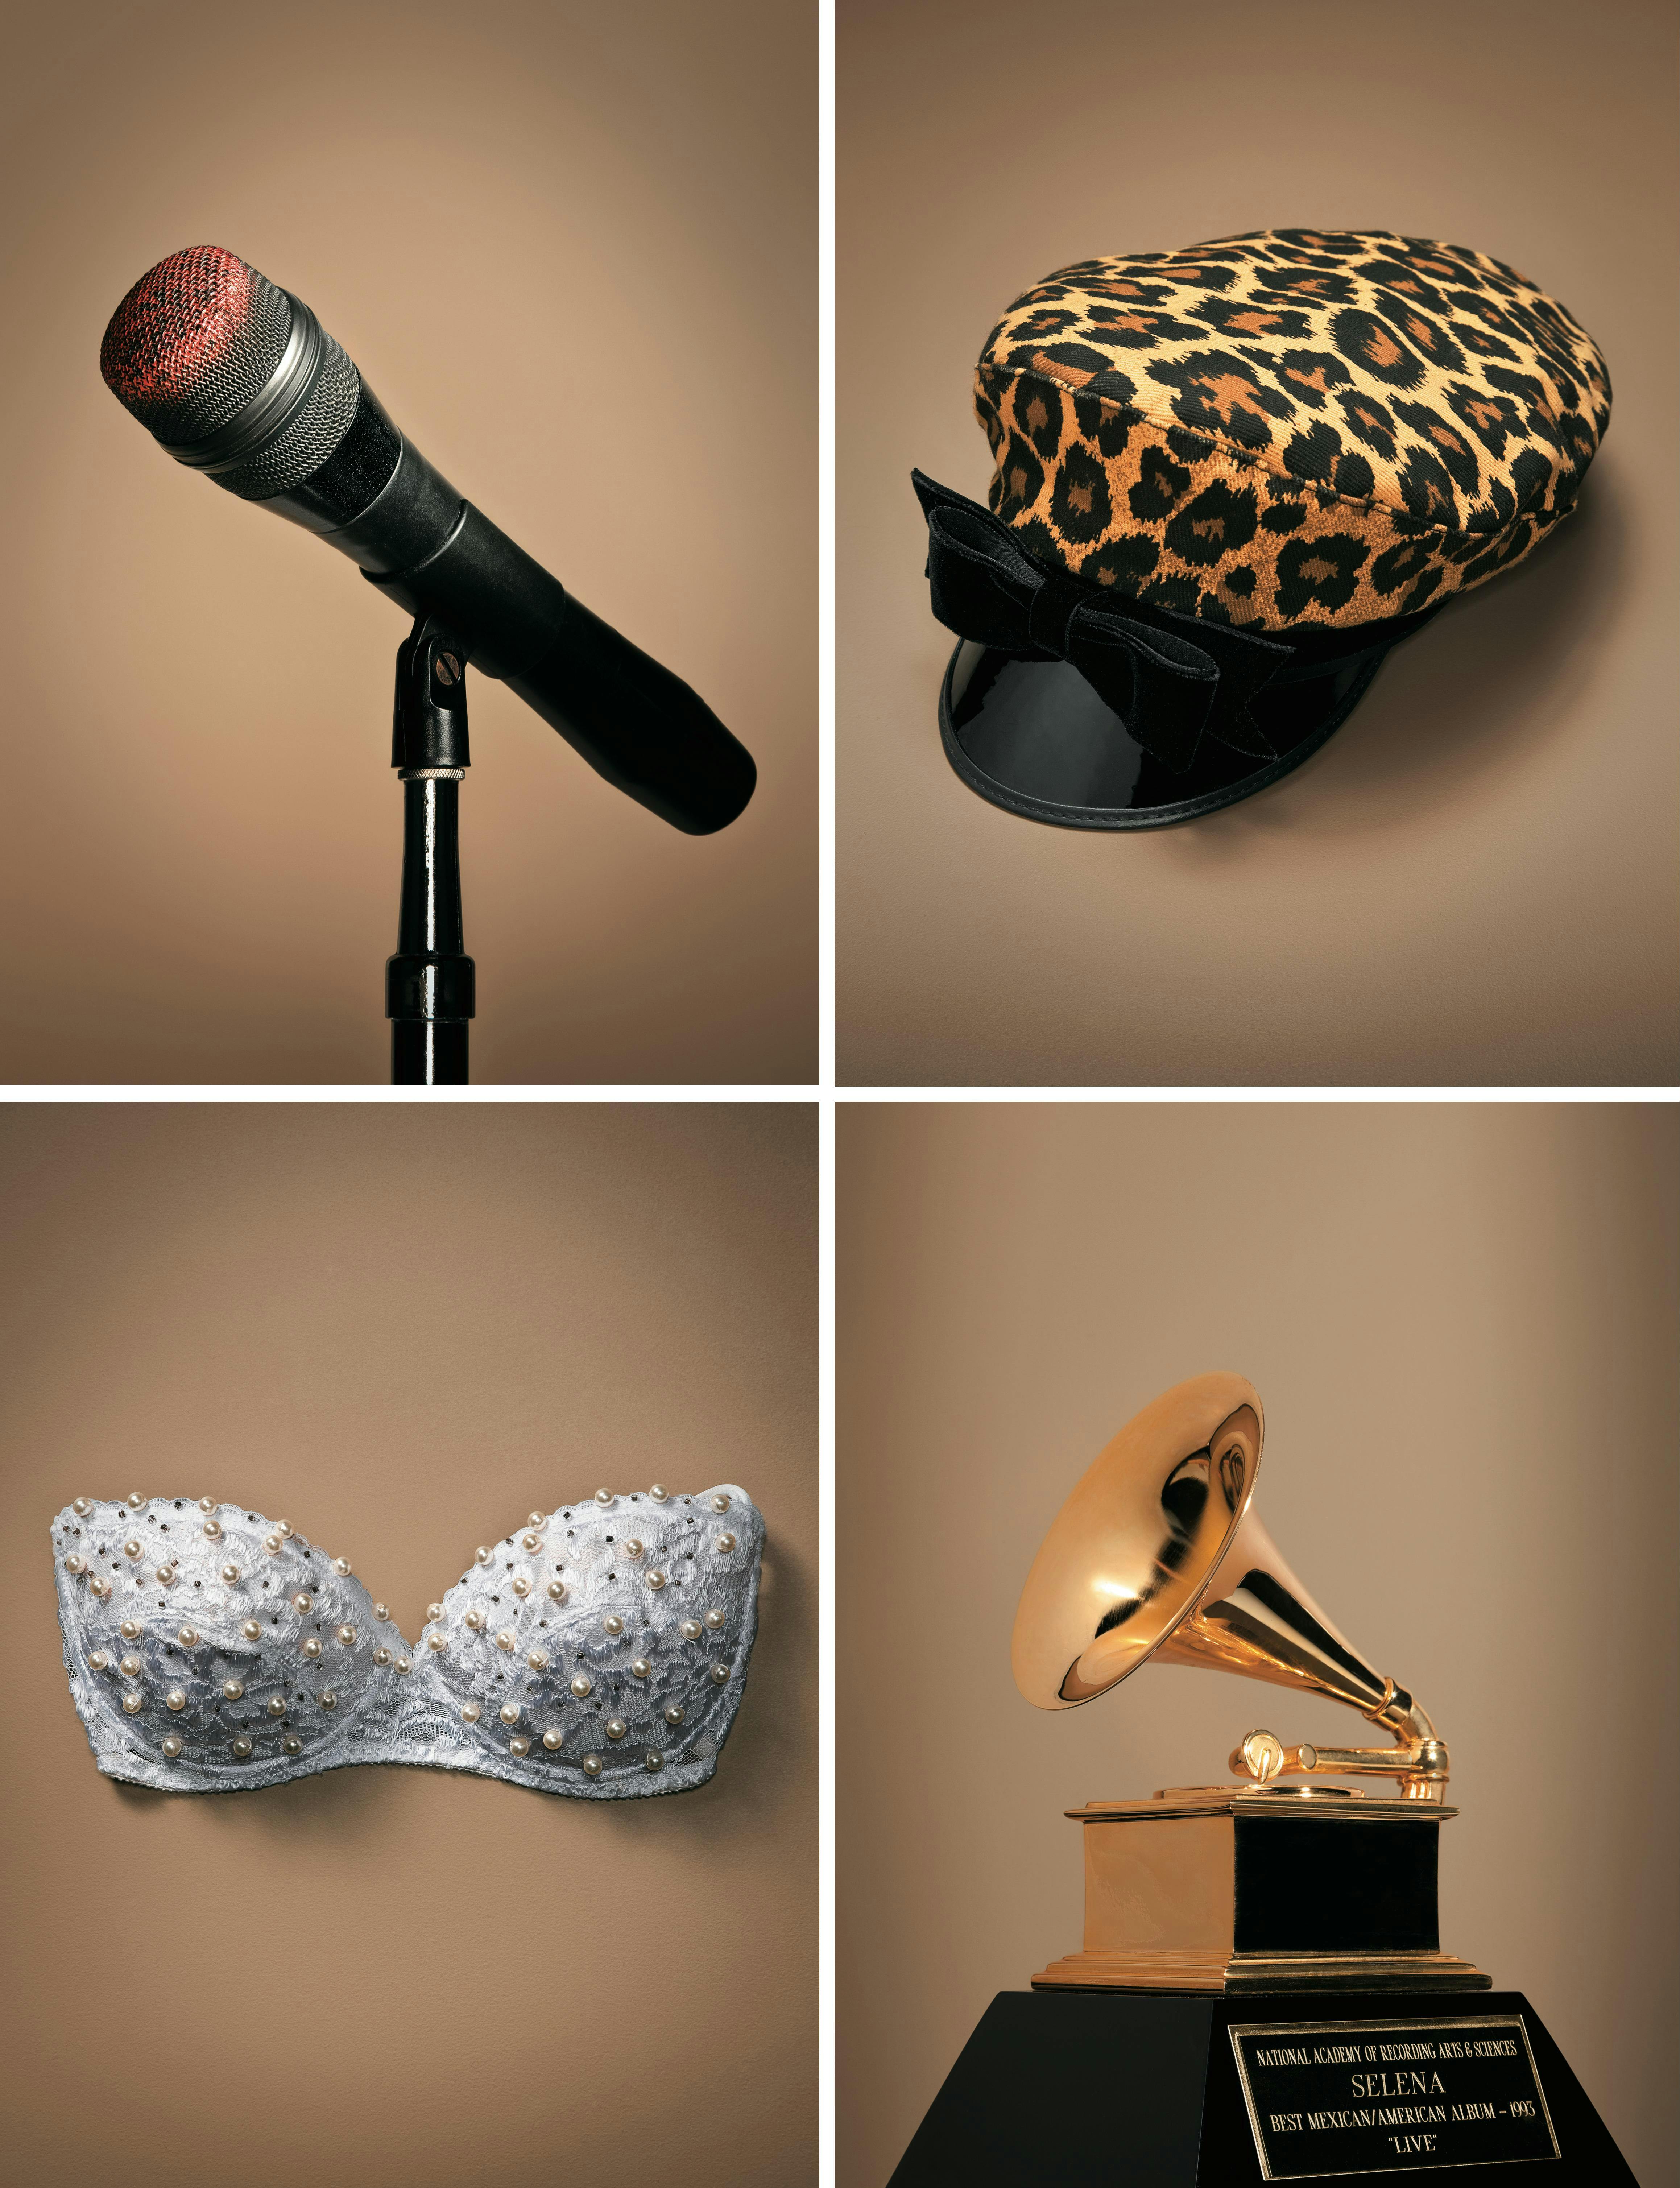 Selena's lipstick-covered microphone, which she frequently had to have cleaned; one of the singer's favorite hats, often worn at autograph signings; the 1993 Grammy for Live!; the bustier Selena hand-beaded for her 1994 Astrodome show.